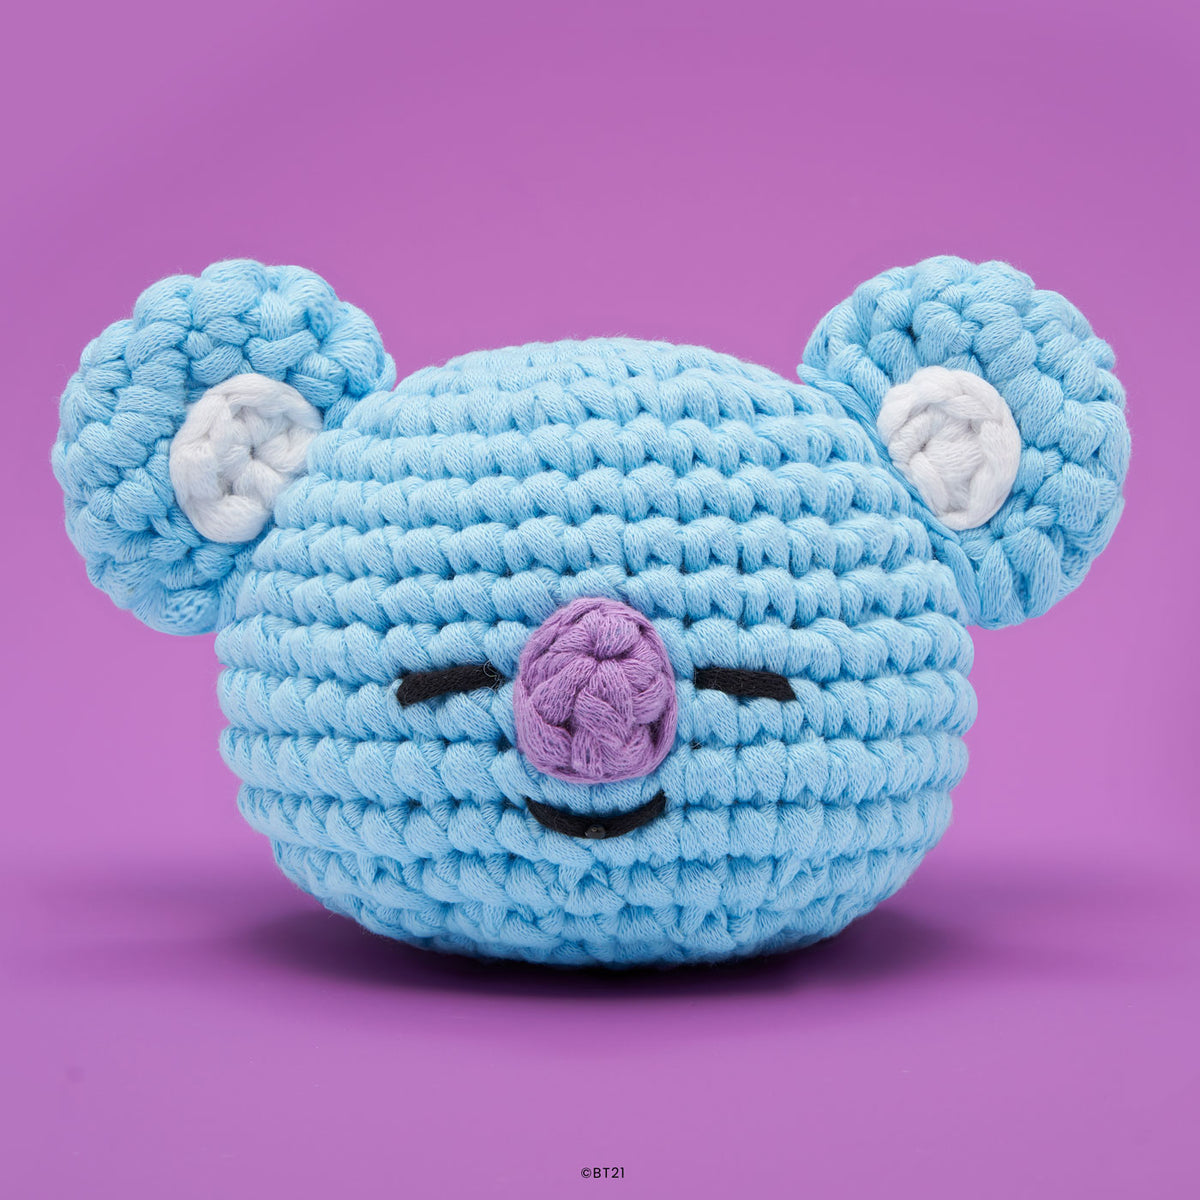 Had a lot of fun crocheting Koya from the Woobles kit! I am not a